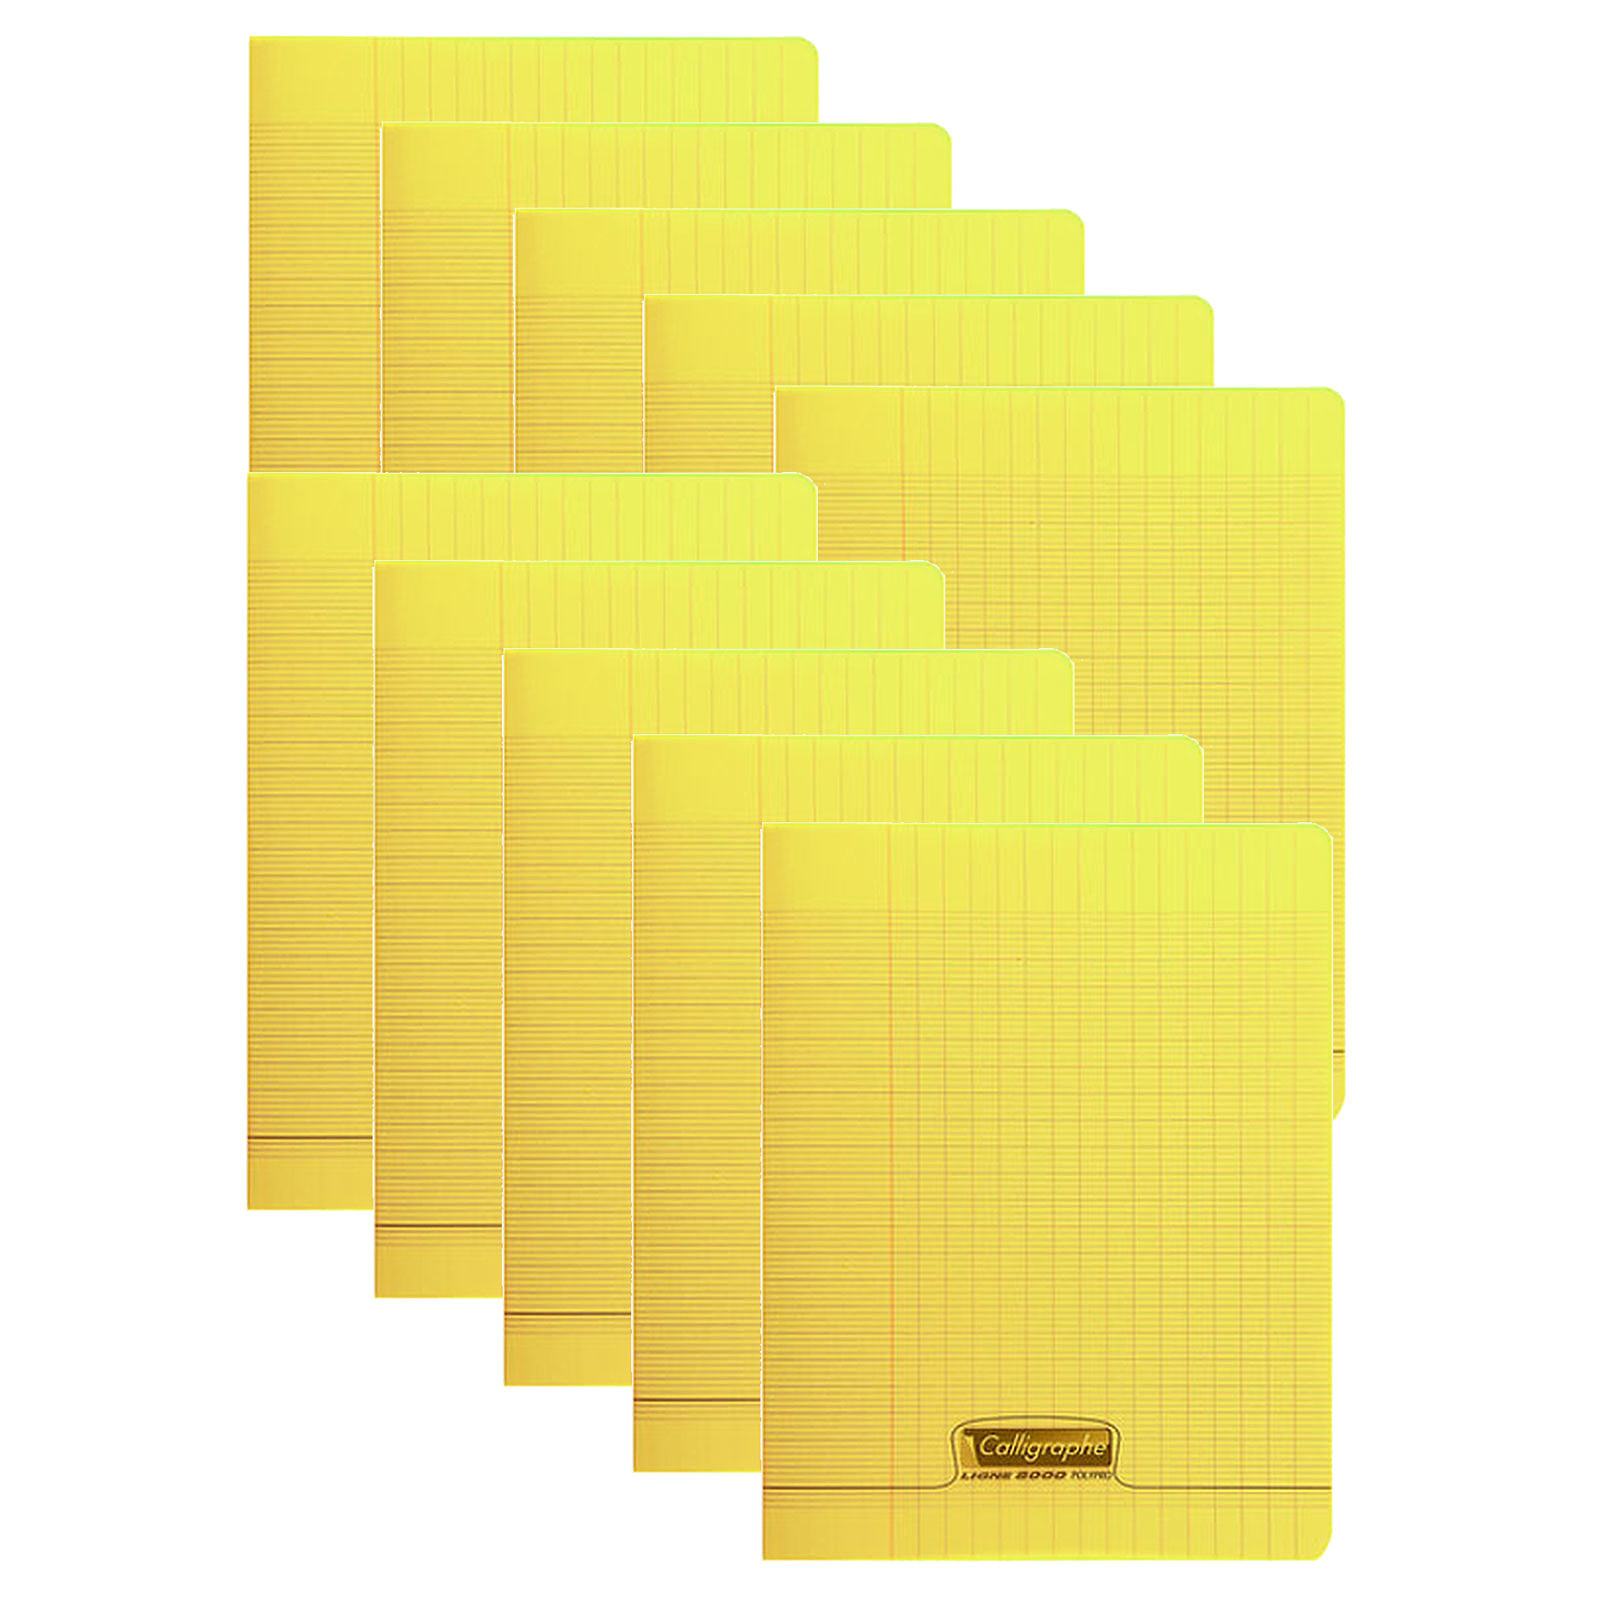 Calligraphe 8000 Polypro Cahier 96 pages 17 x 22 cm seyes grands carreaux Jaune (x10) - Cahier Calligraphe